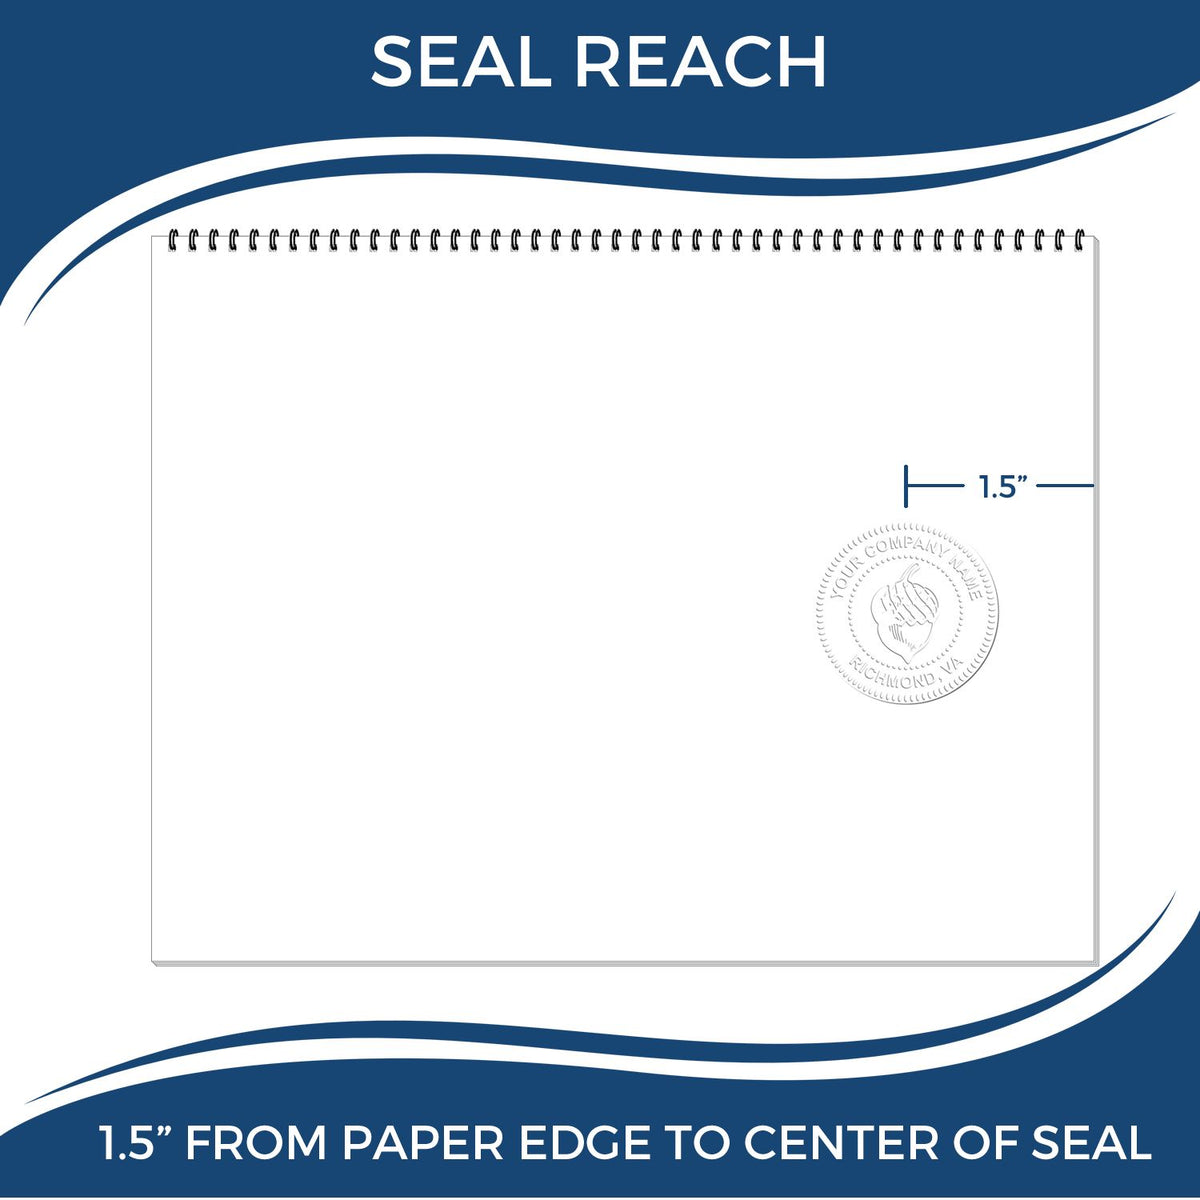 An infographic showing the seal reach which is represented by a ruler and a miniature seal image of the Handheld Louisiana Land Surveyor Seal